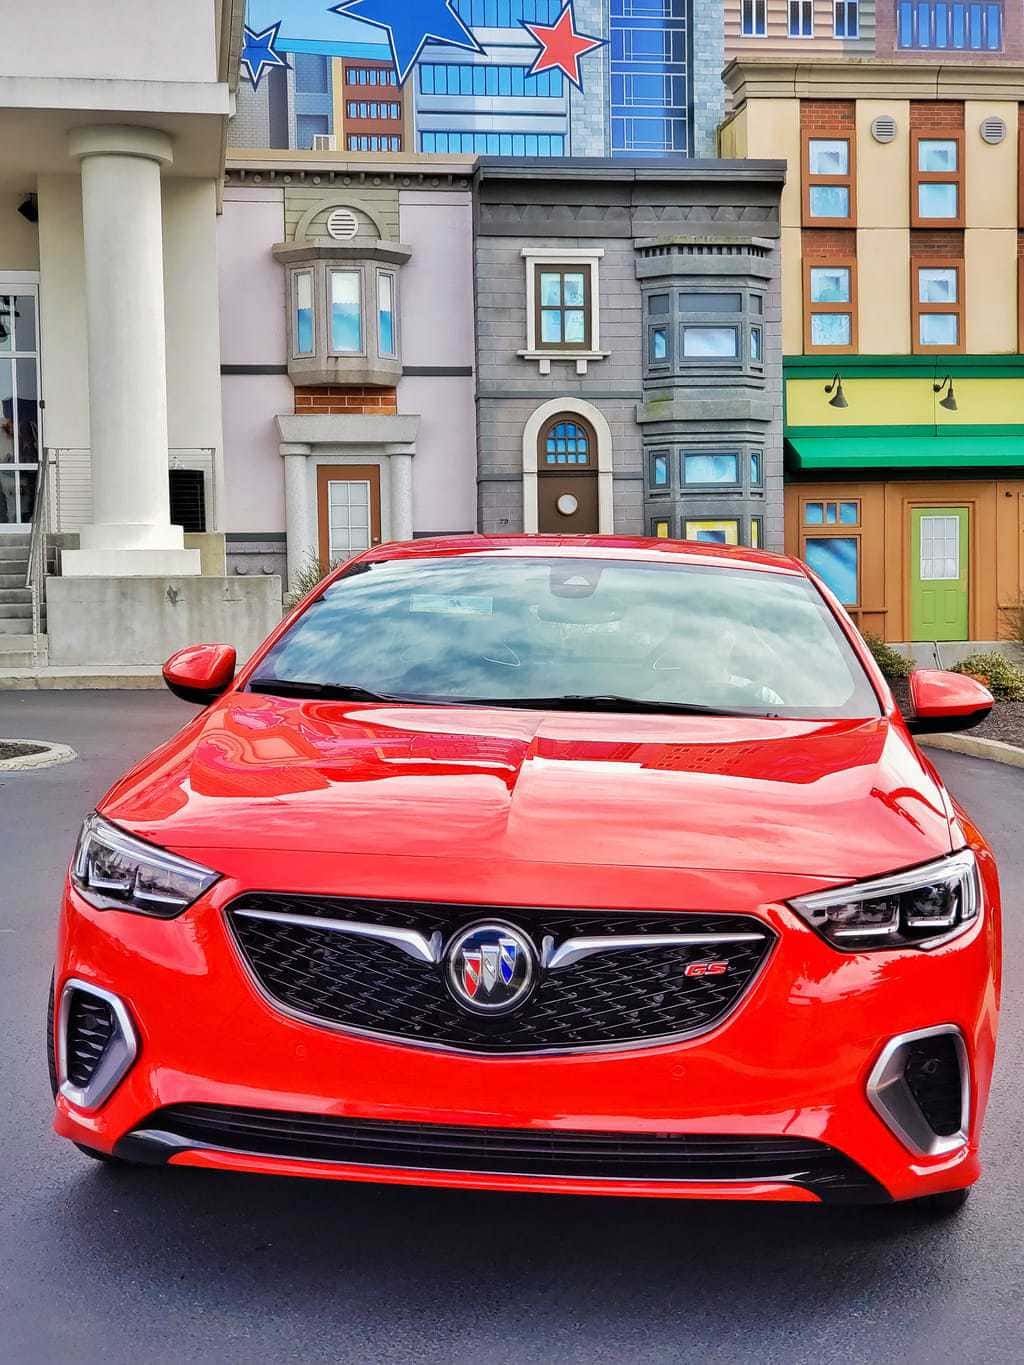 During our latest and greatest road trip to Pigeon Forge, TN we were able to do so in style. Riding in the 2019 GMC Regal GS made our road trip a breeze.